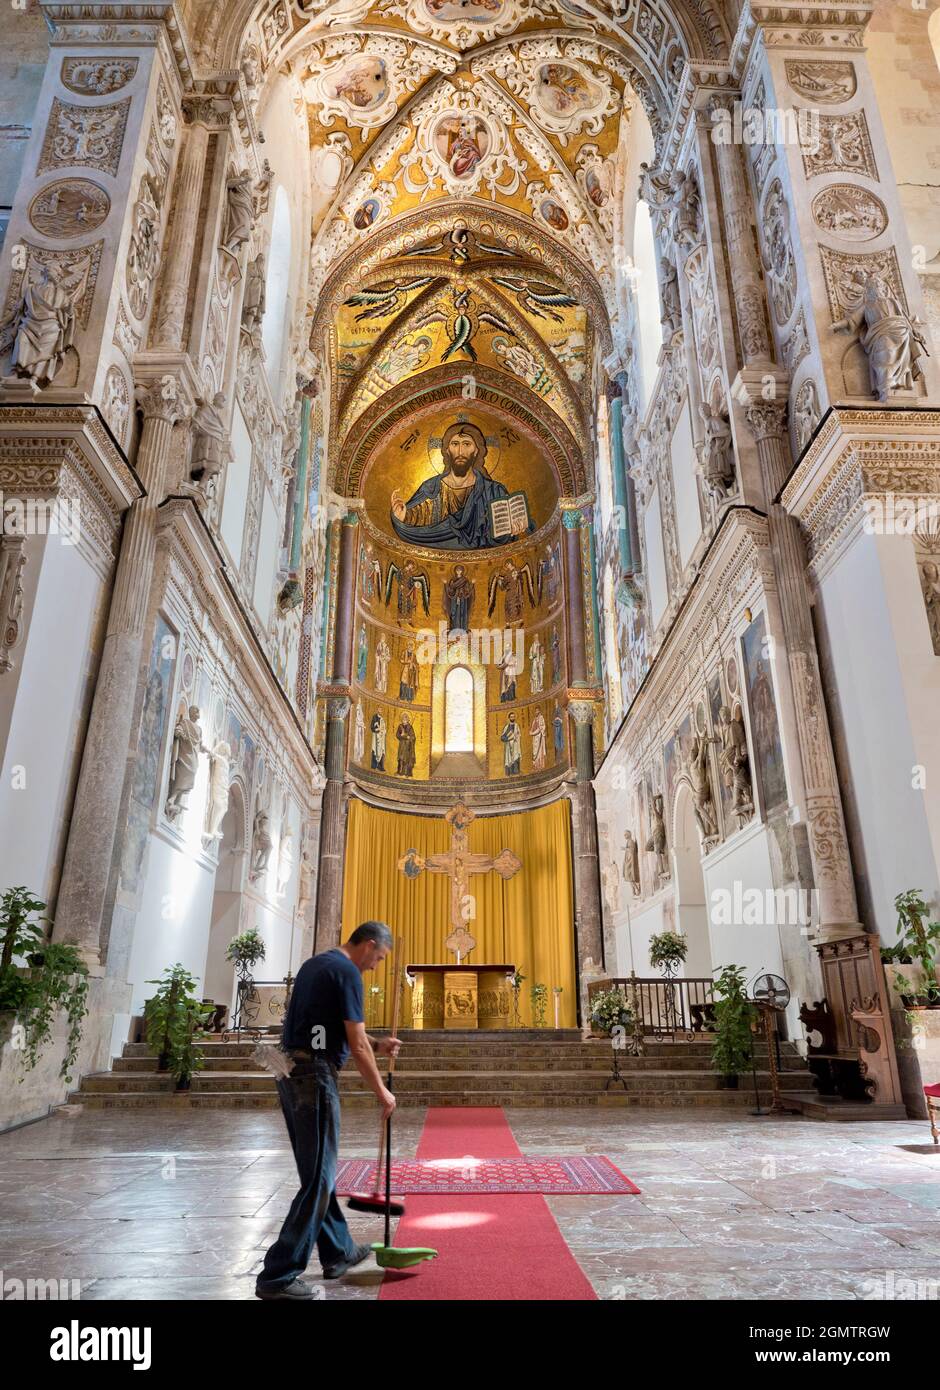 Palermo, Sicily, Italy - 25 September 2019     Started in 1131, the UNESCO - listed Cefal Cathedral is one of the greatest surviving examples of Norm Stock Photo